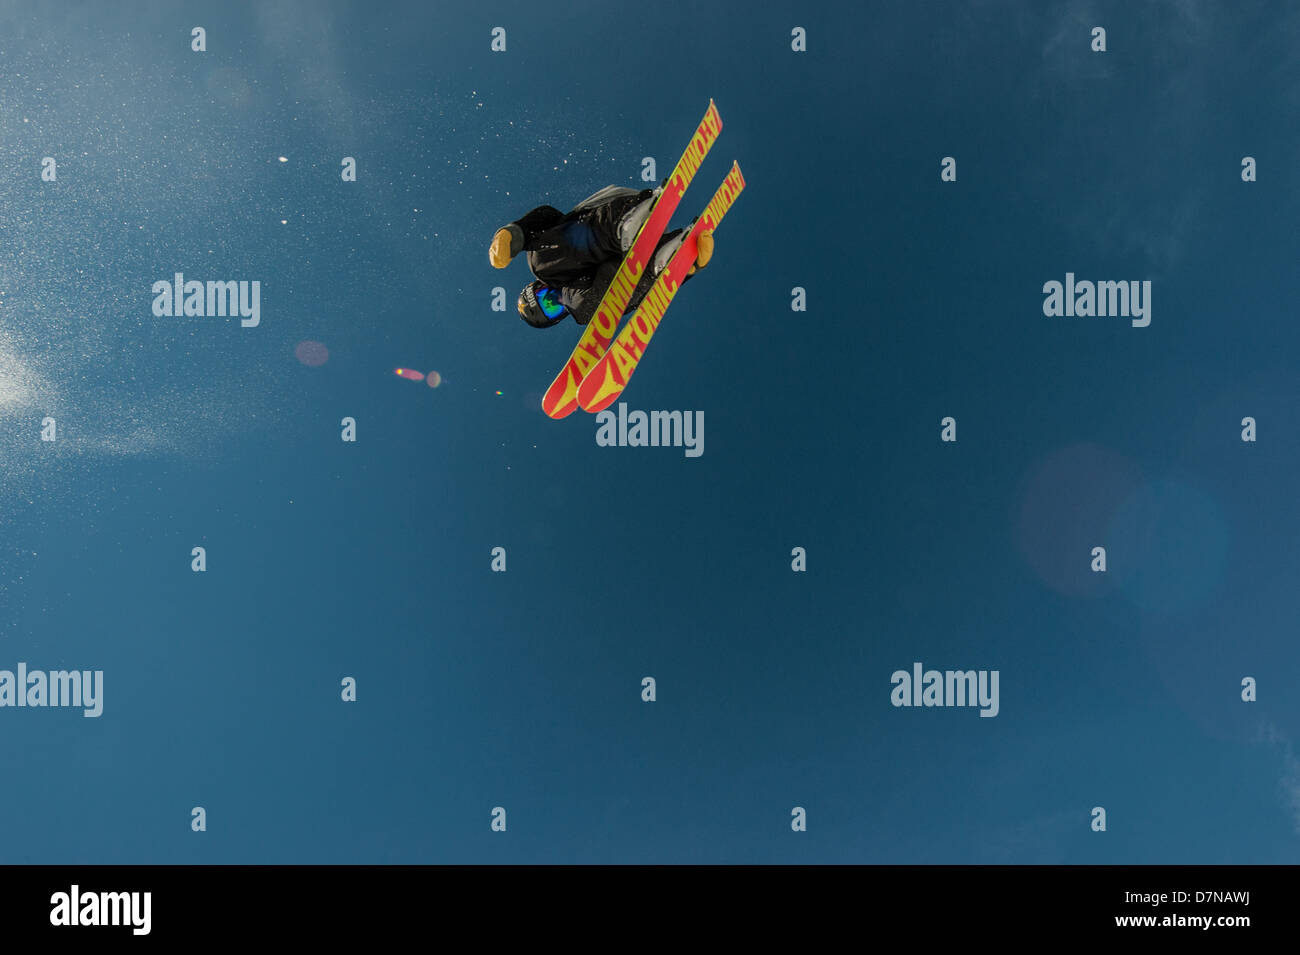 Close up shot of a skier executing a trick in a snowpark Stock Photo